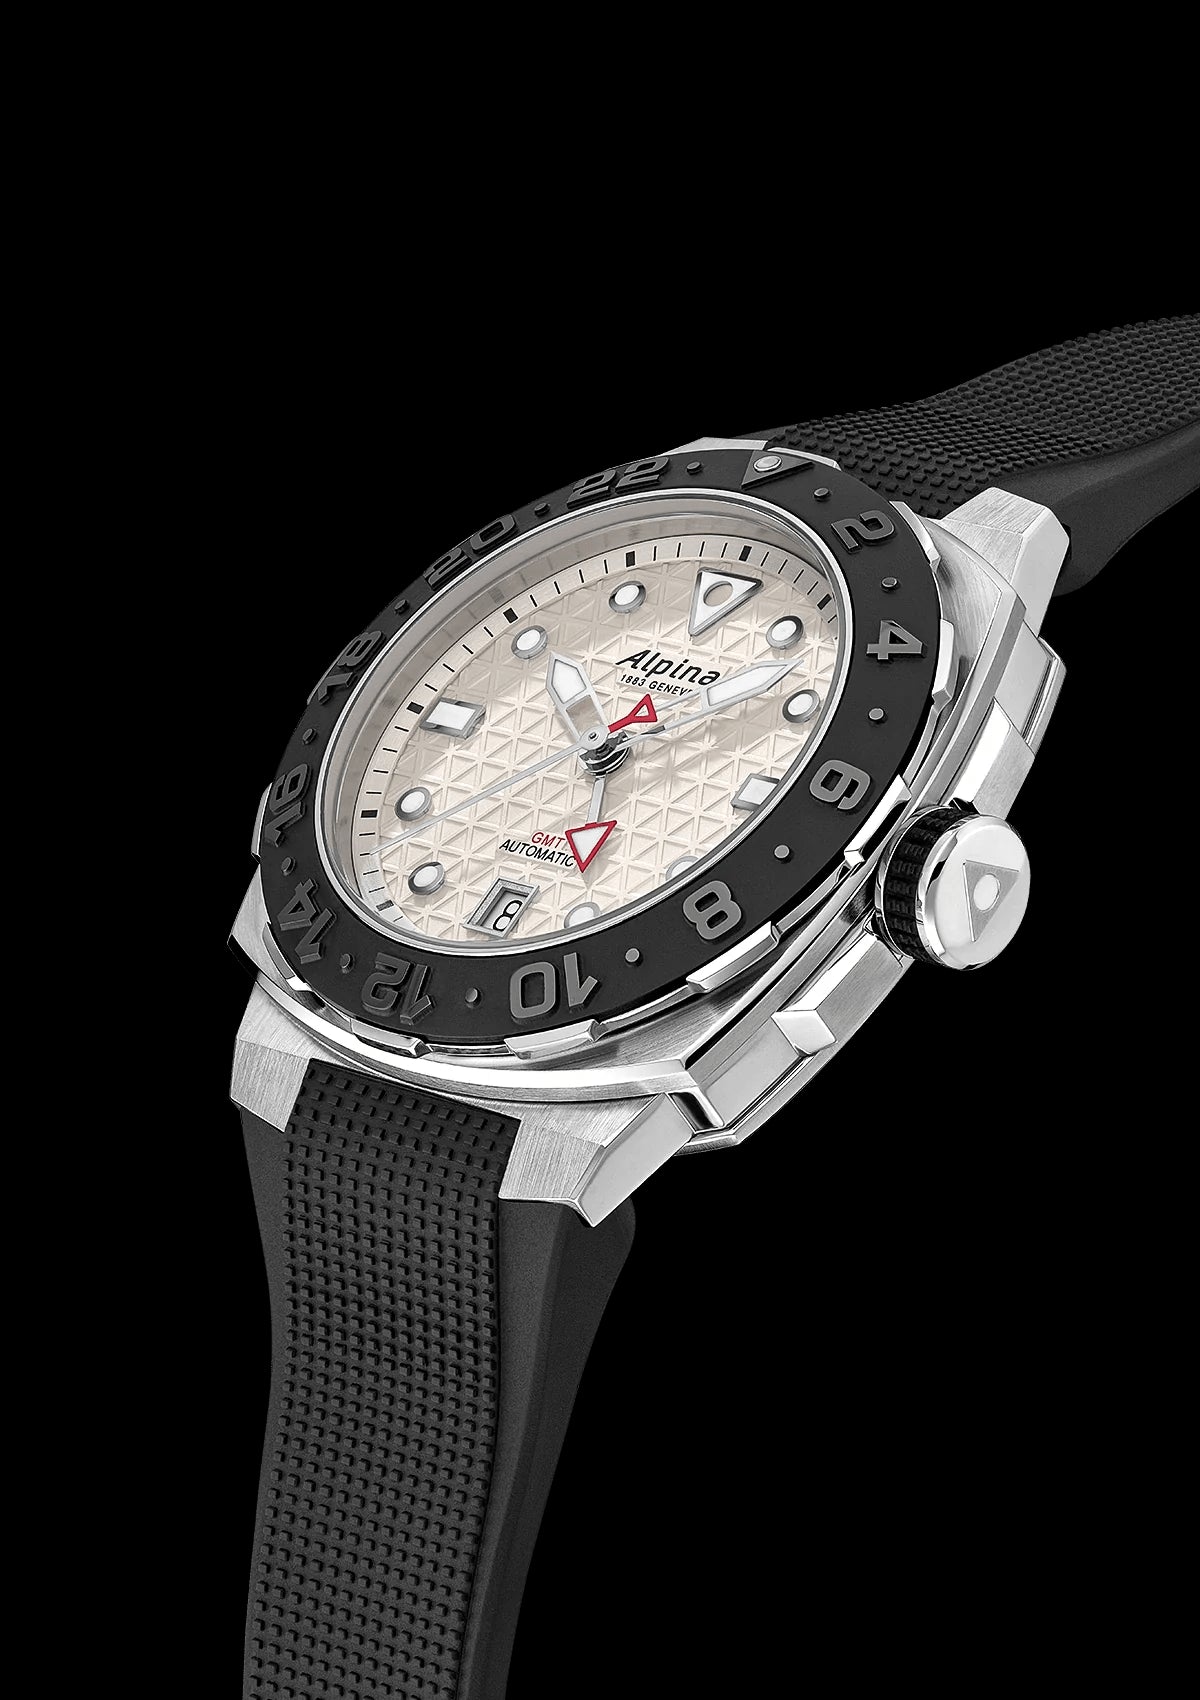 Seastrong Diver Extreme Automatic GMT - Alpina Watches